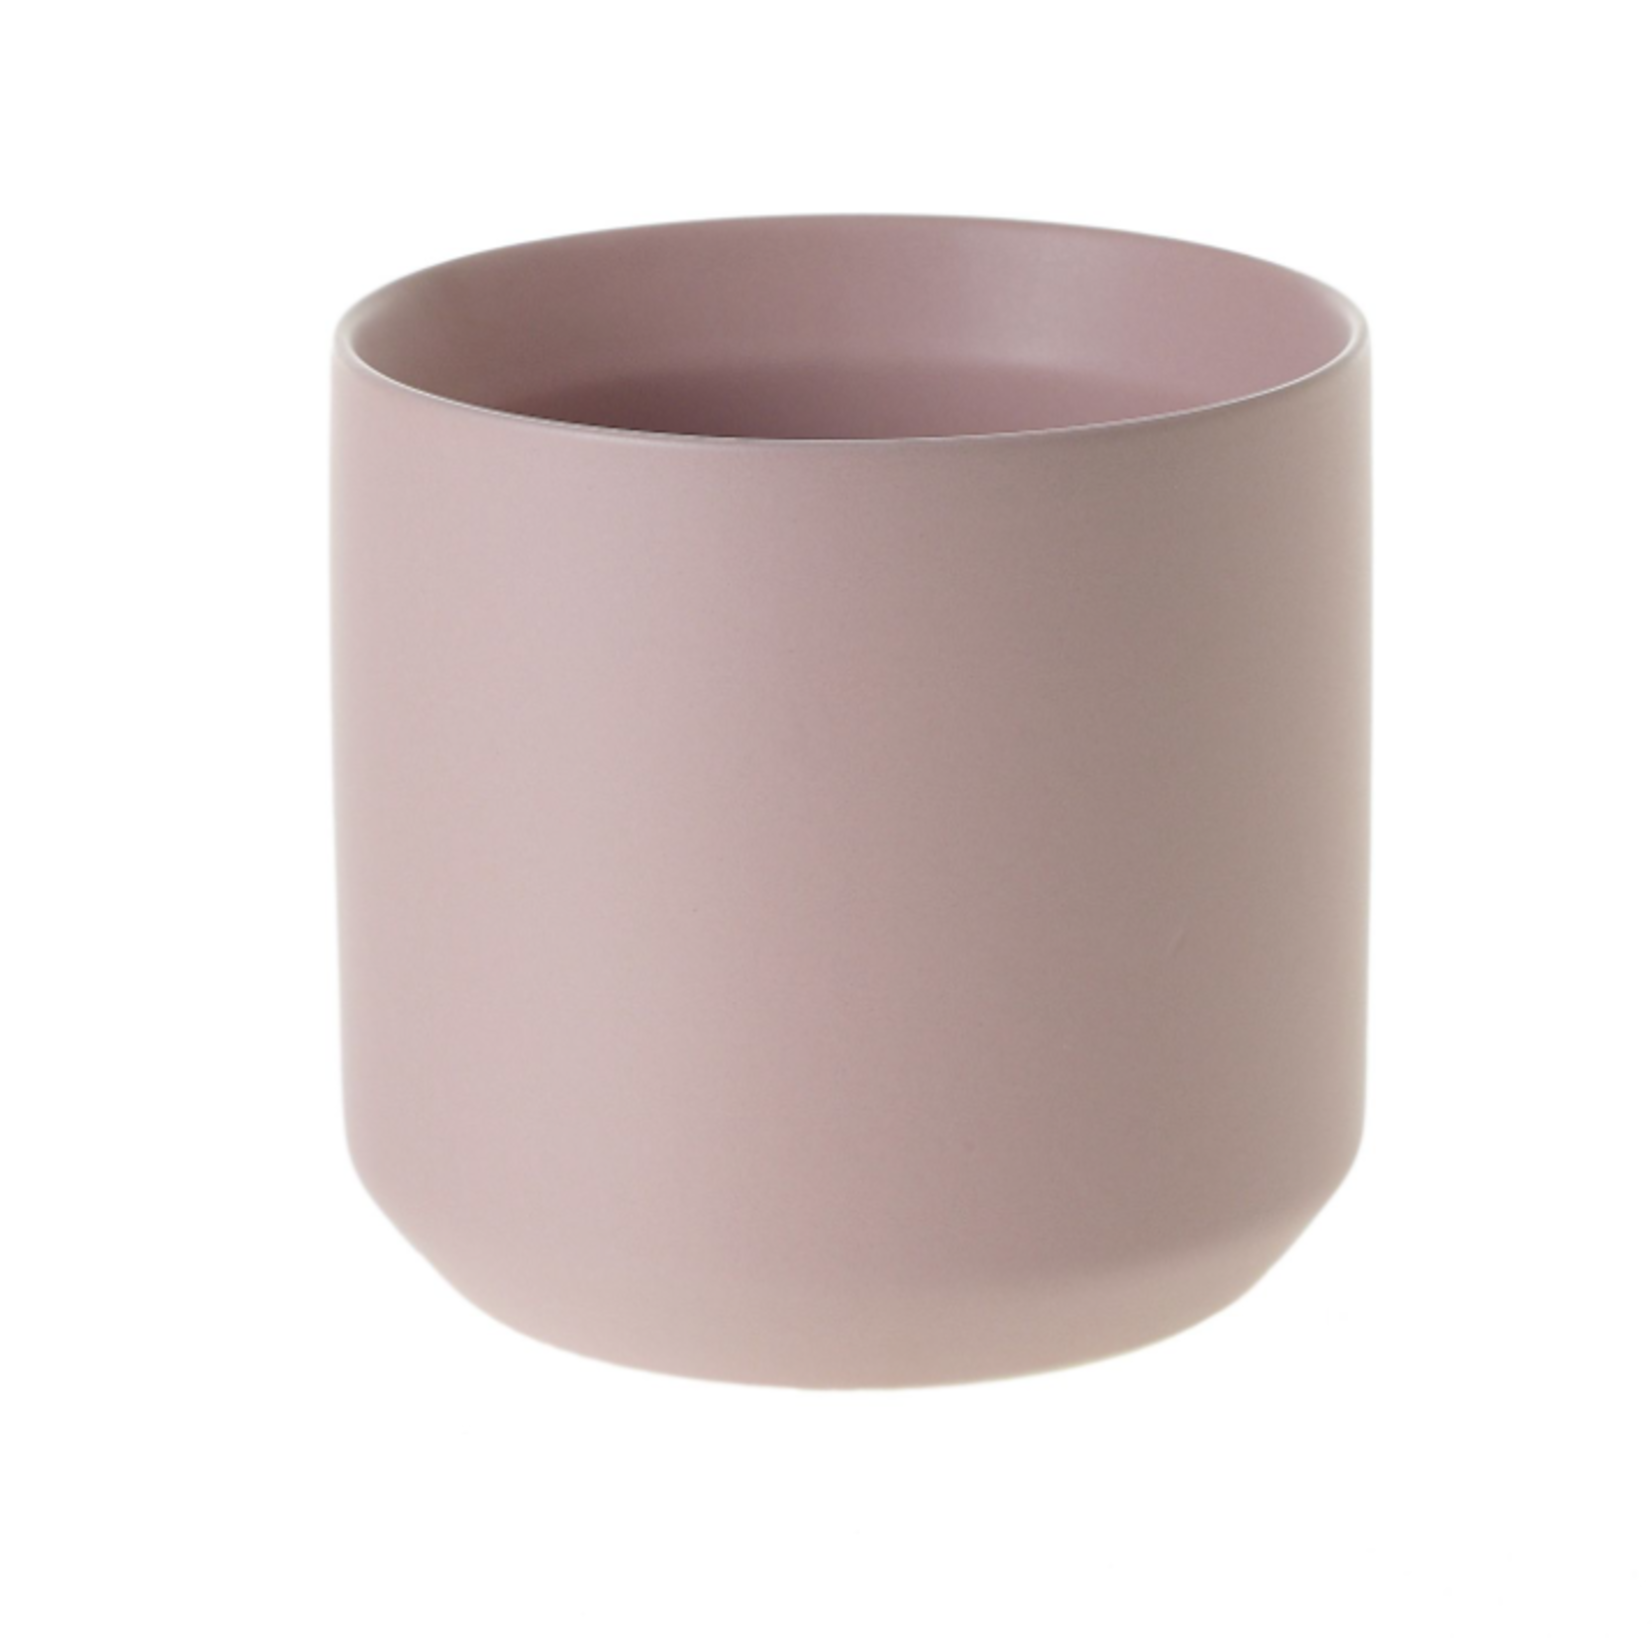 4.5”H X 4.75” PINK KENDALL POT COLLECTION (AD)